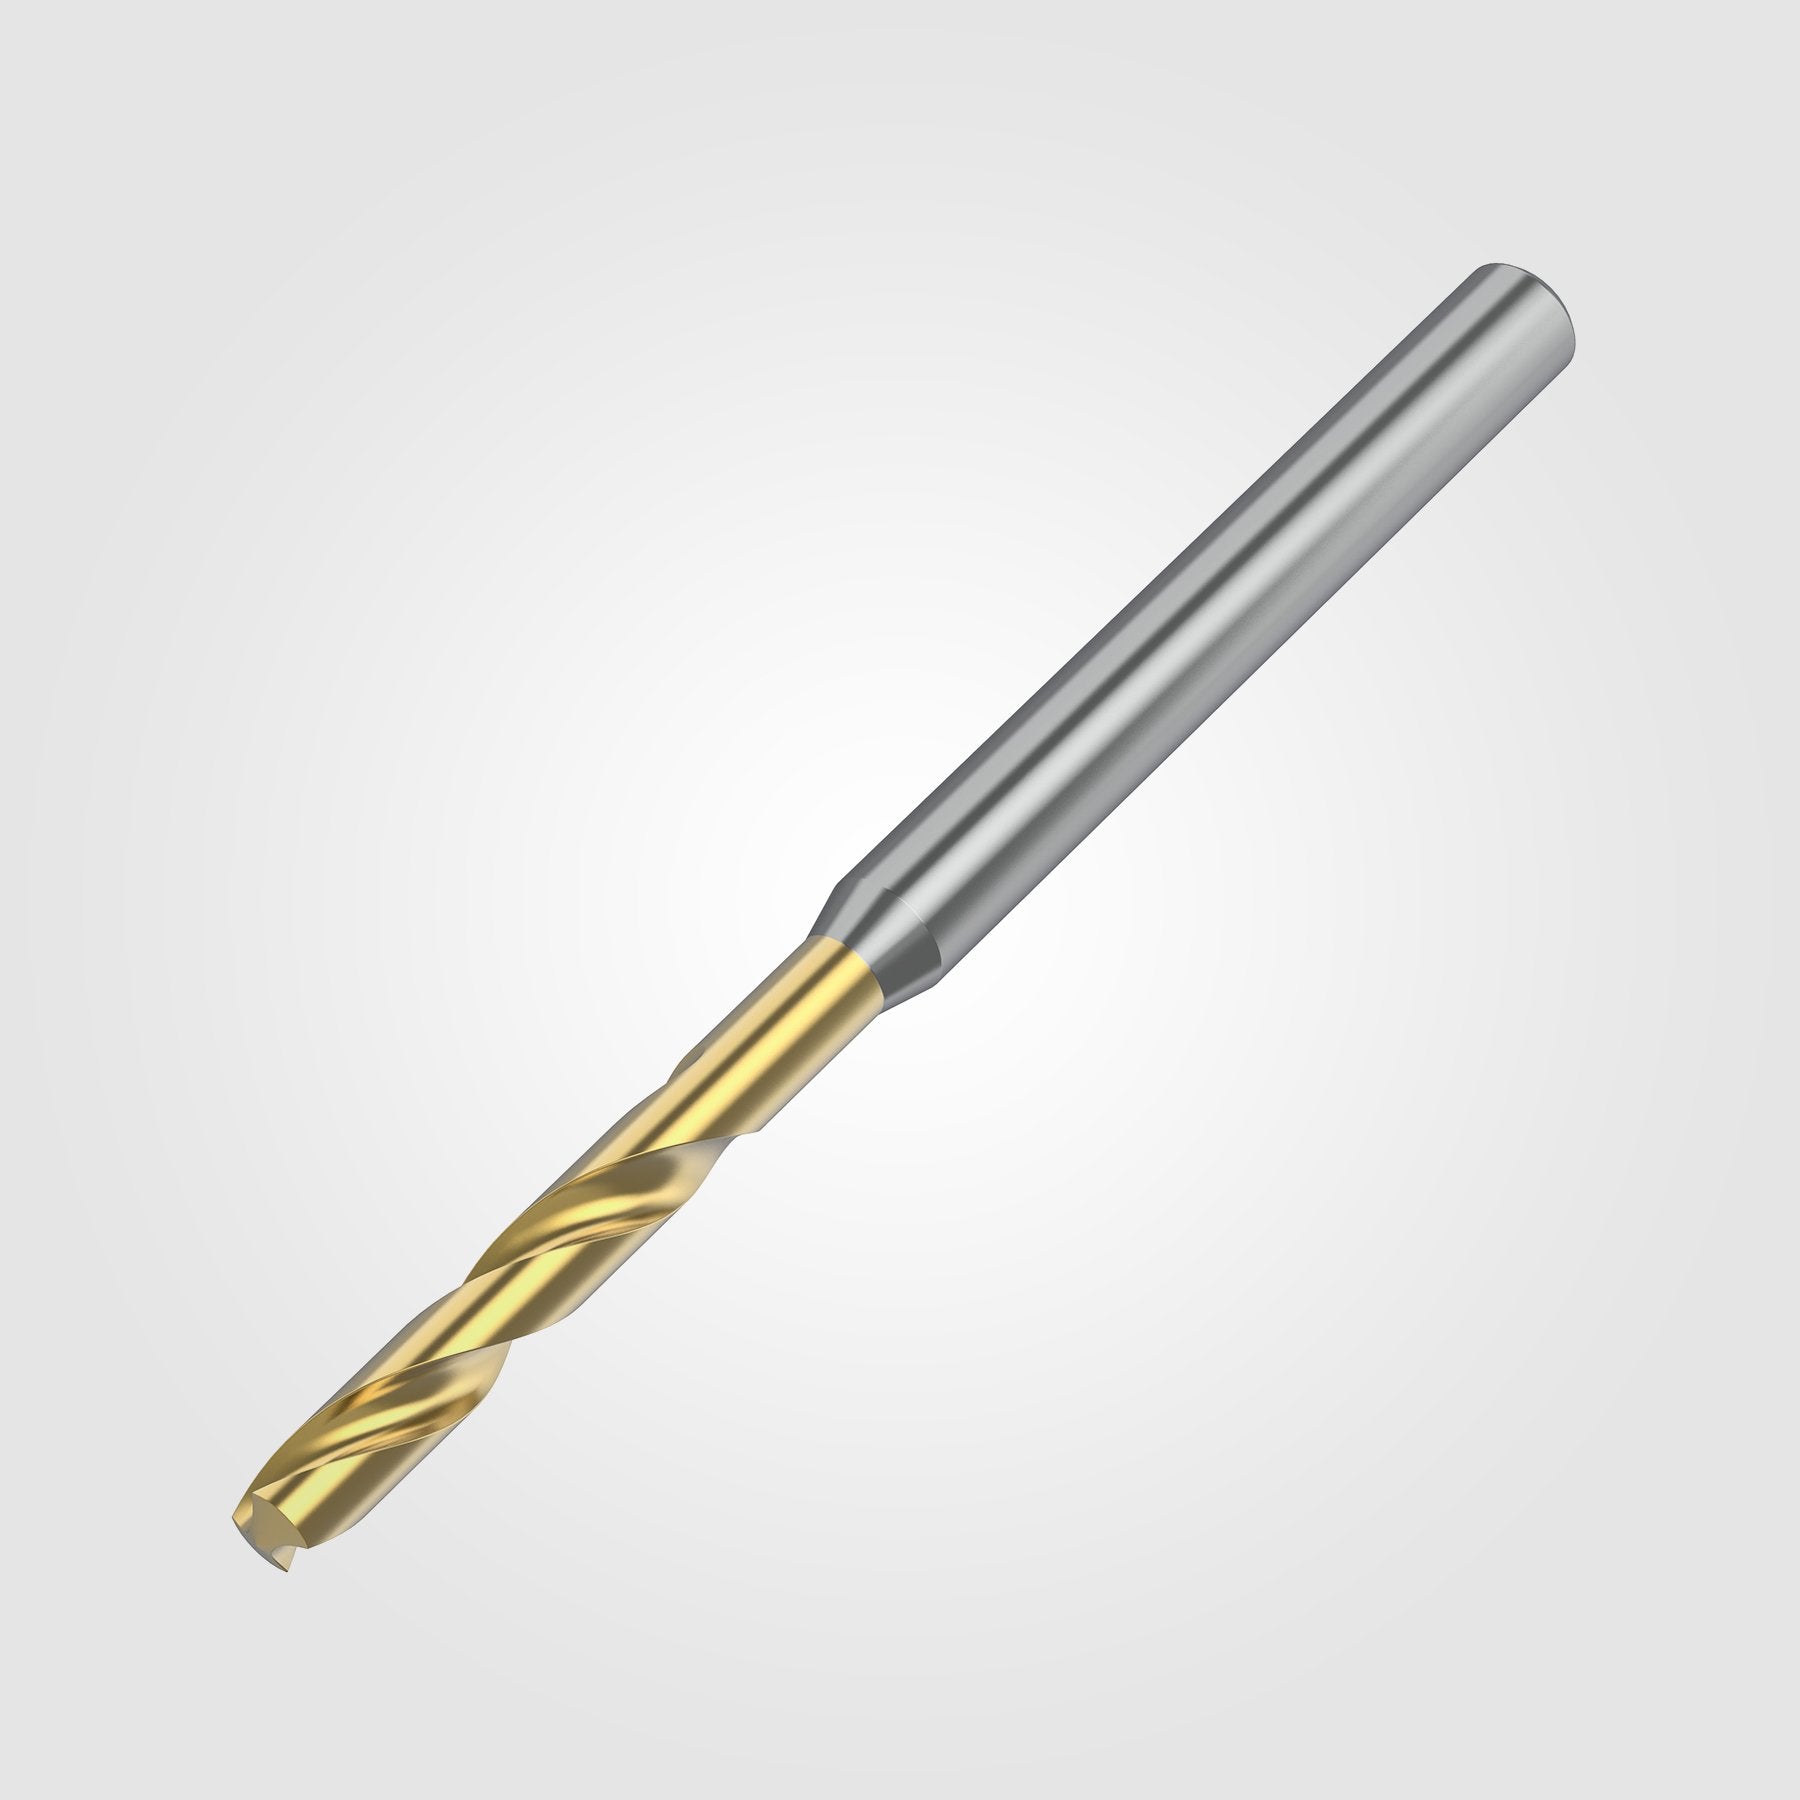 GOdrill (THROUGH COOLANT) | 15.8mm / .6220" / 5xD | SOLID CARBIDE DRILL | 4149360